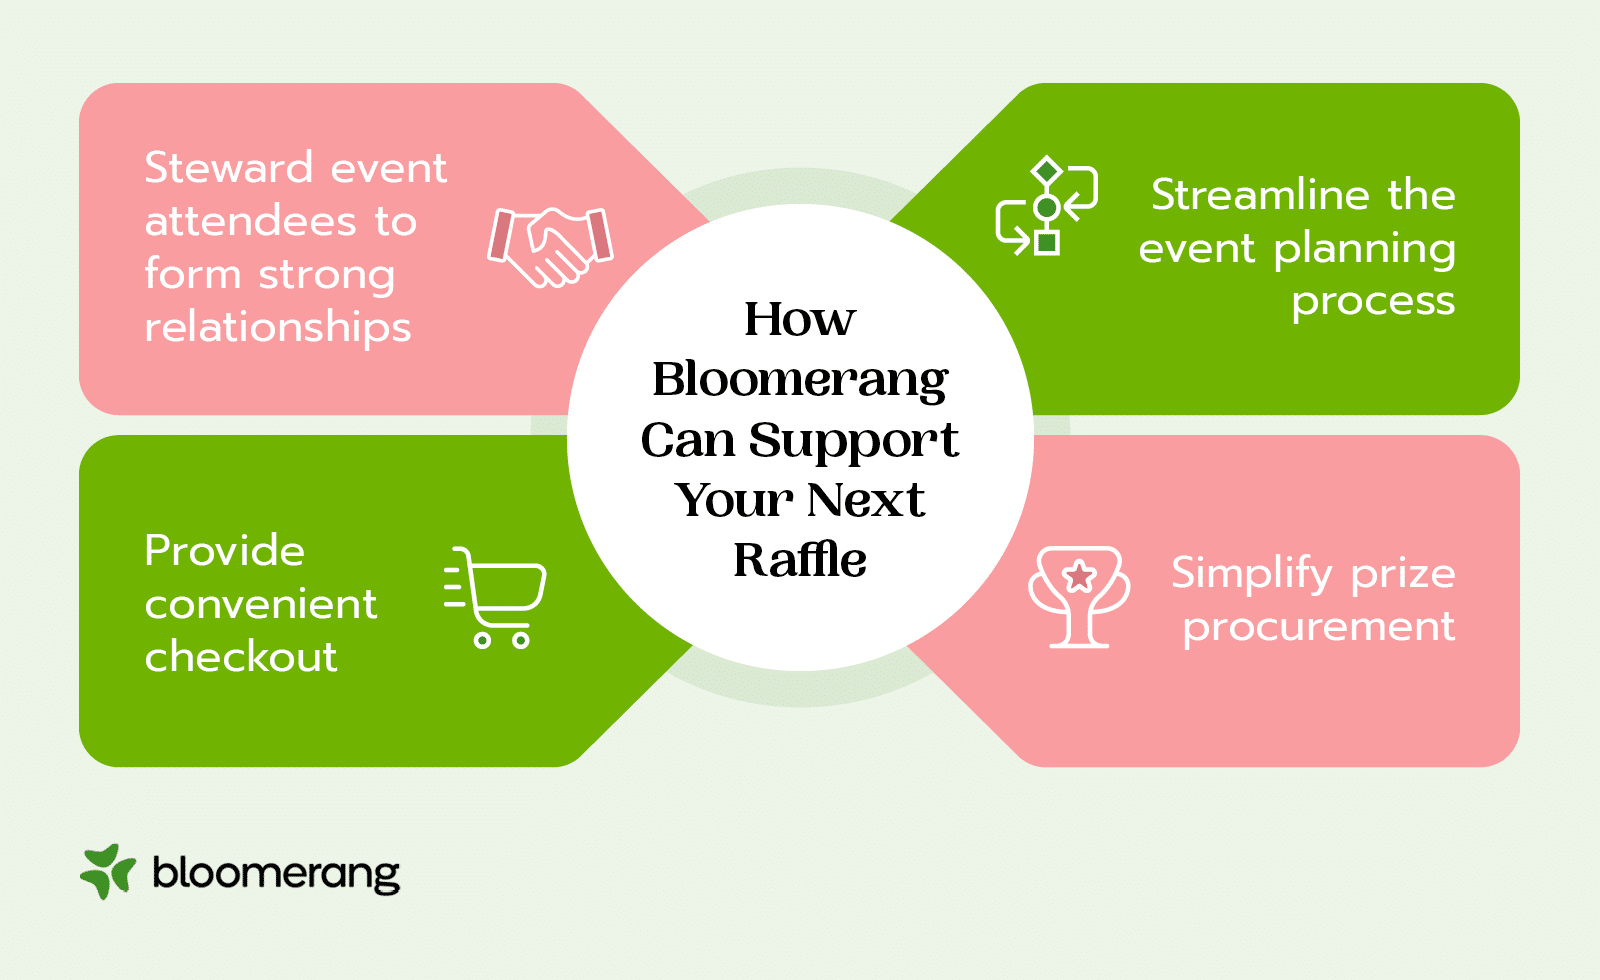 Ways Bloomerang can support your next raffle event (explained in the text below) 